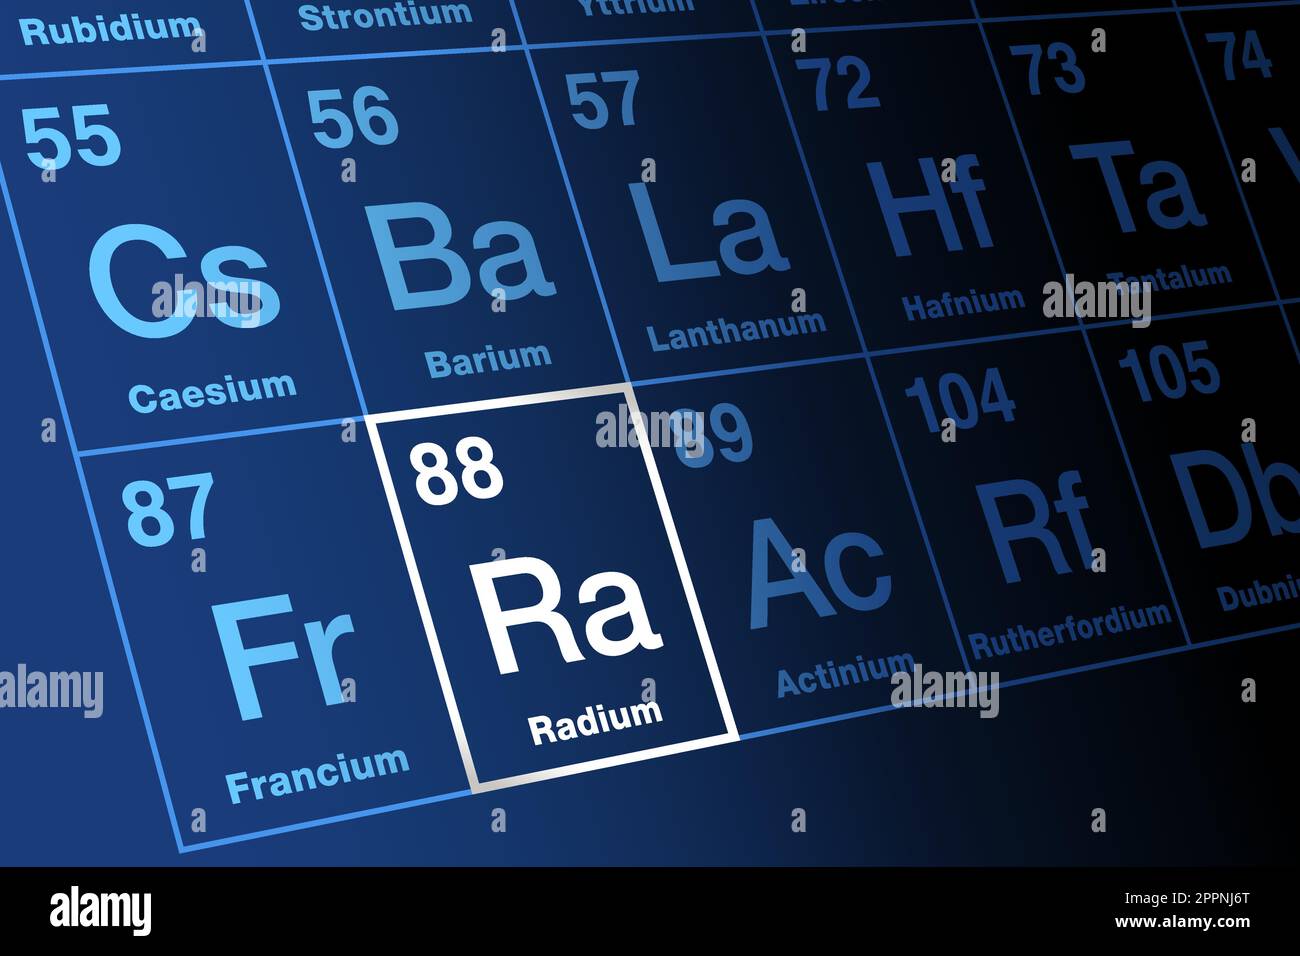 Radium on periodic table of the elements, with element symbol Ra Stock Vector